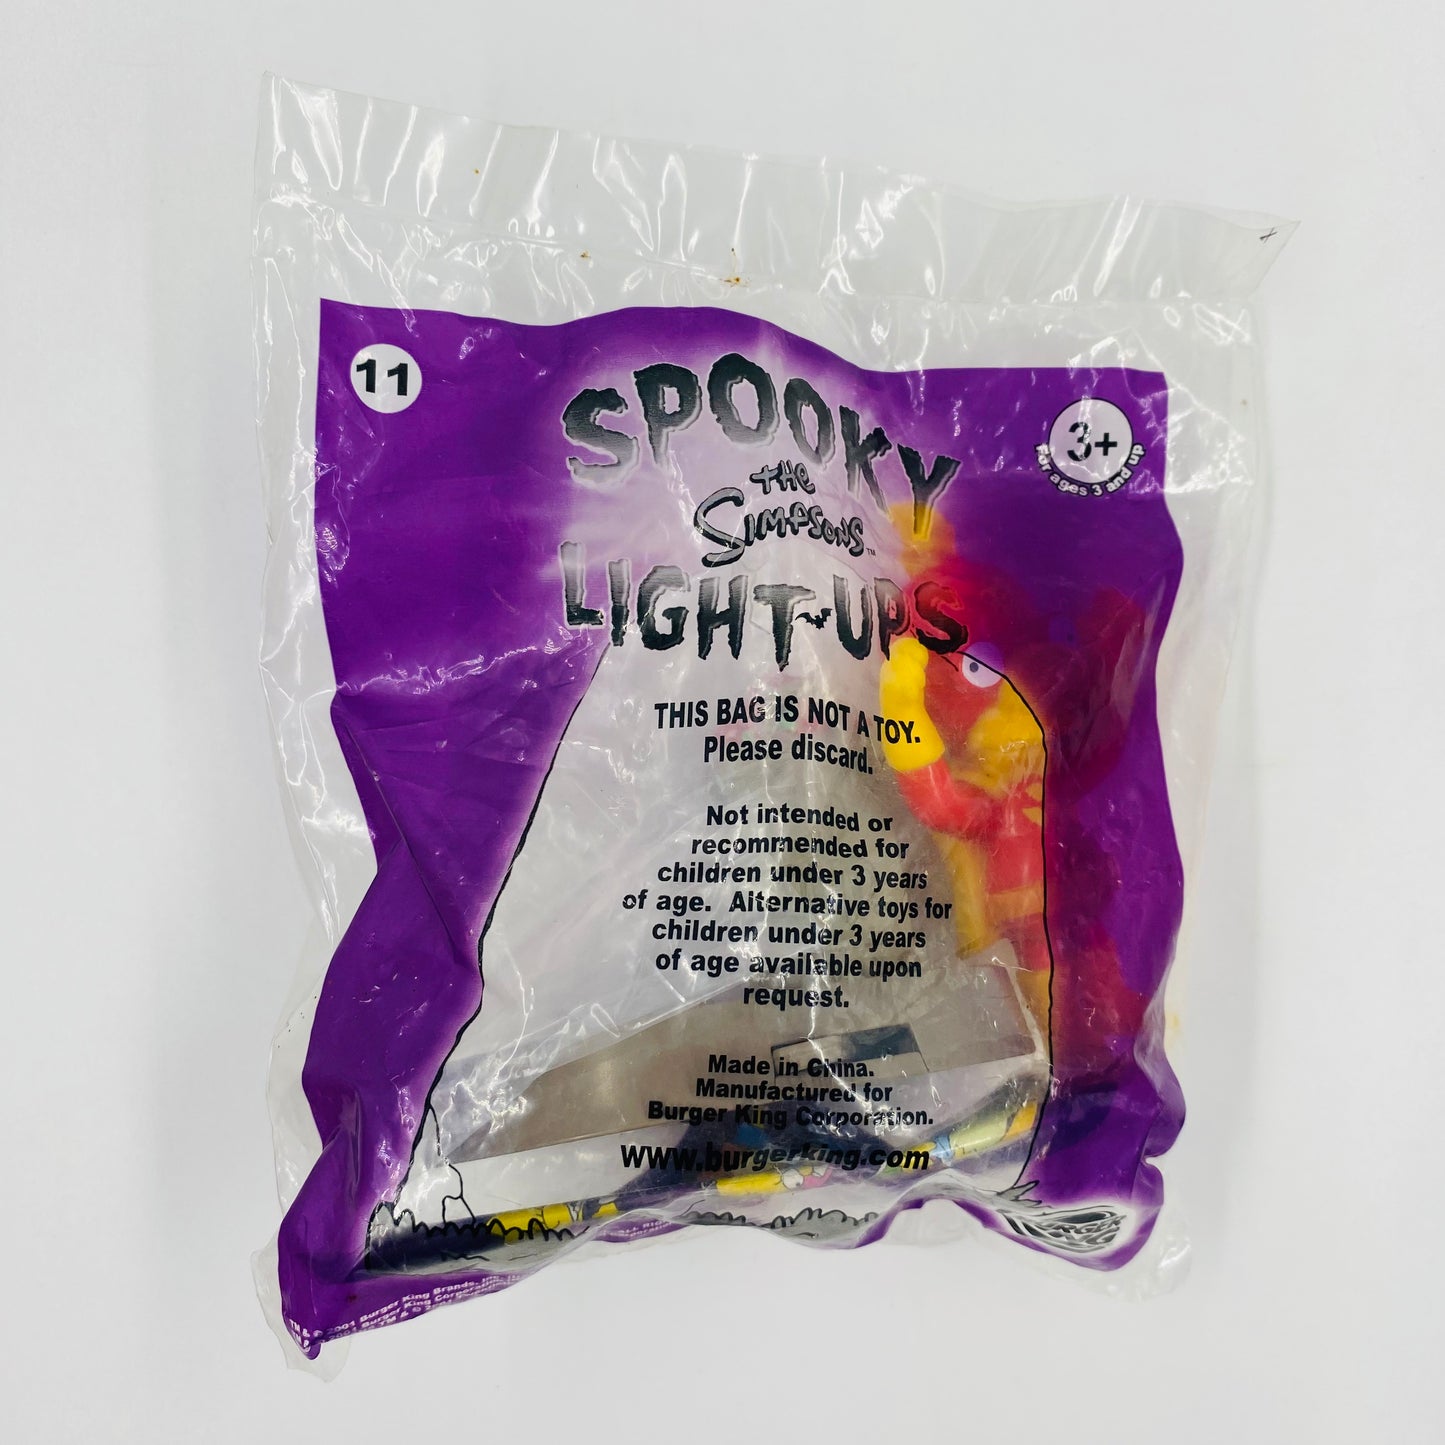 The Simpsons Spooky Light-Ups Milhouse Burger King Kids' Meals toy (2001) bagged